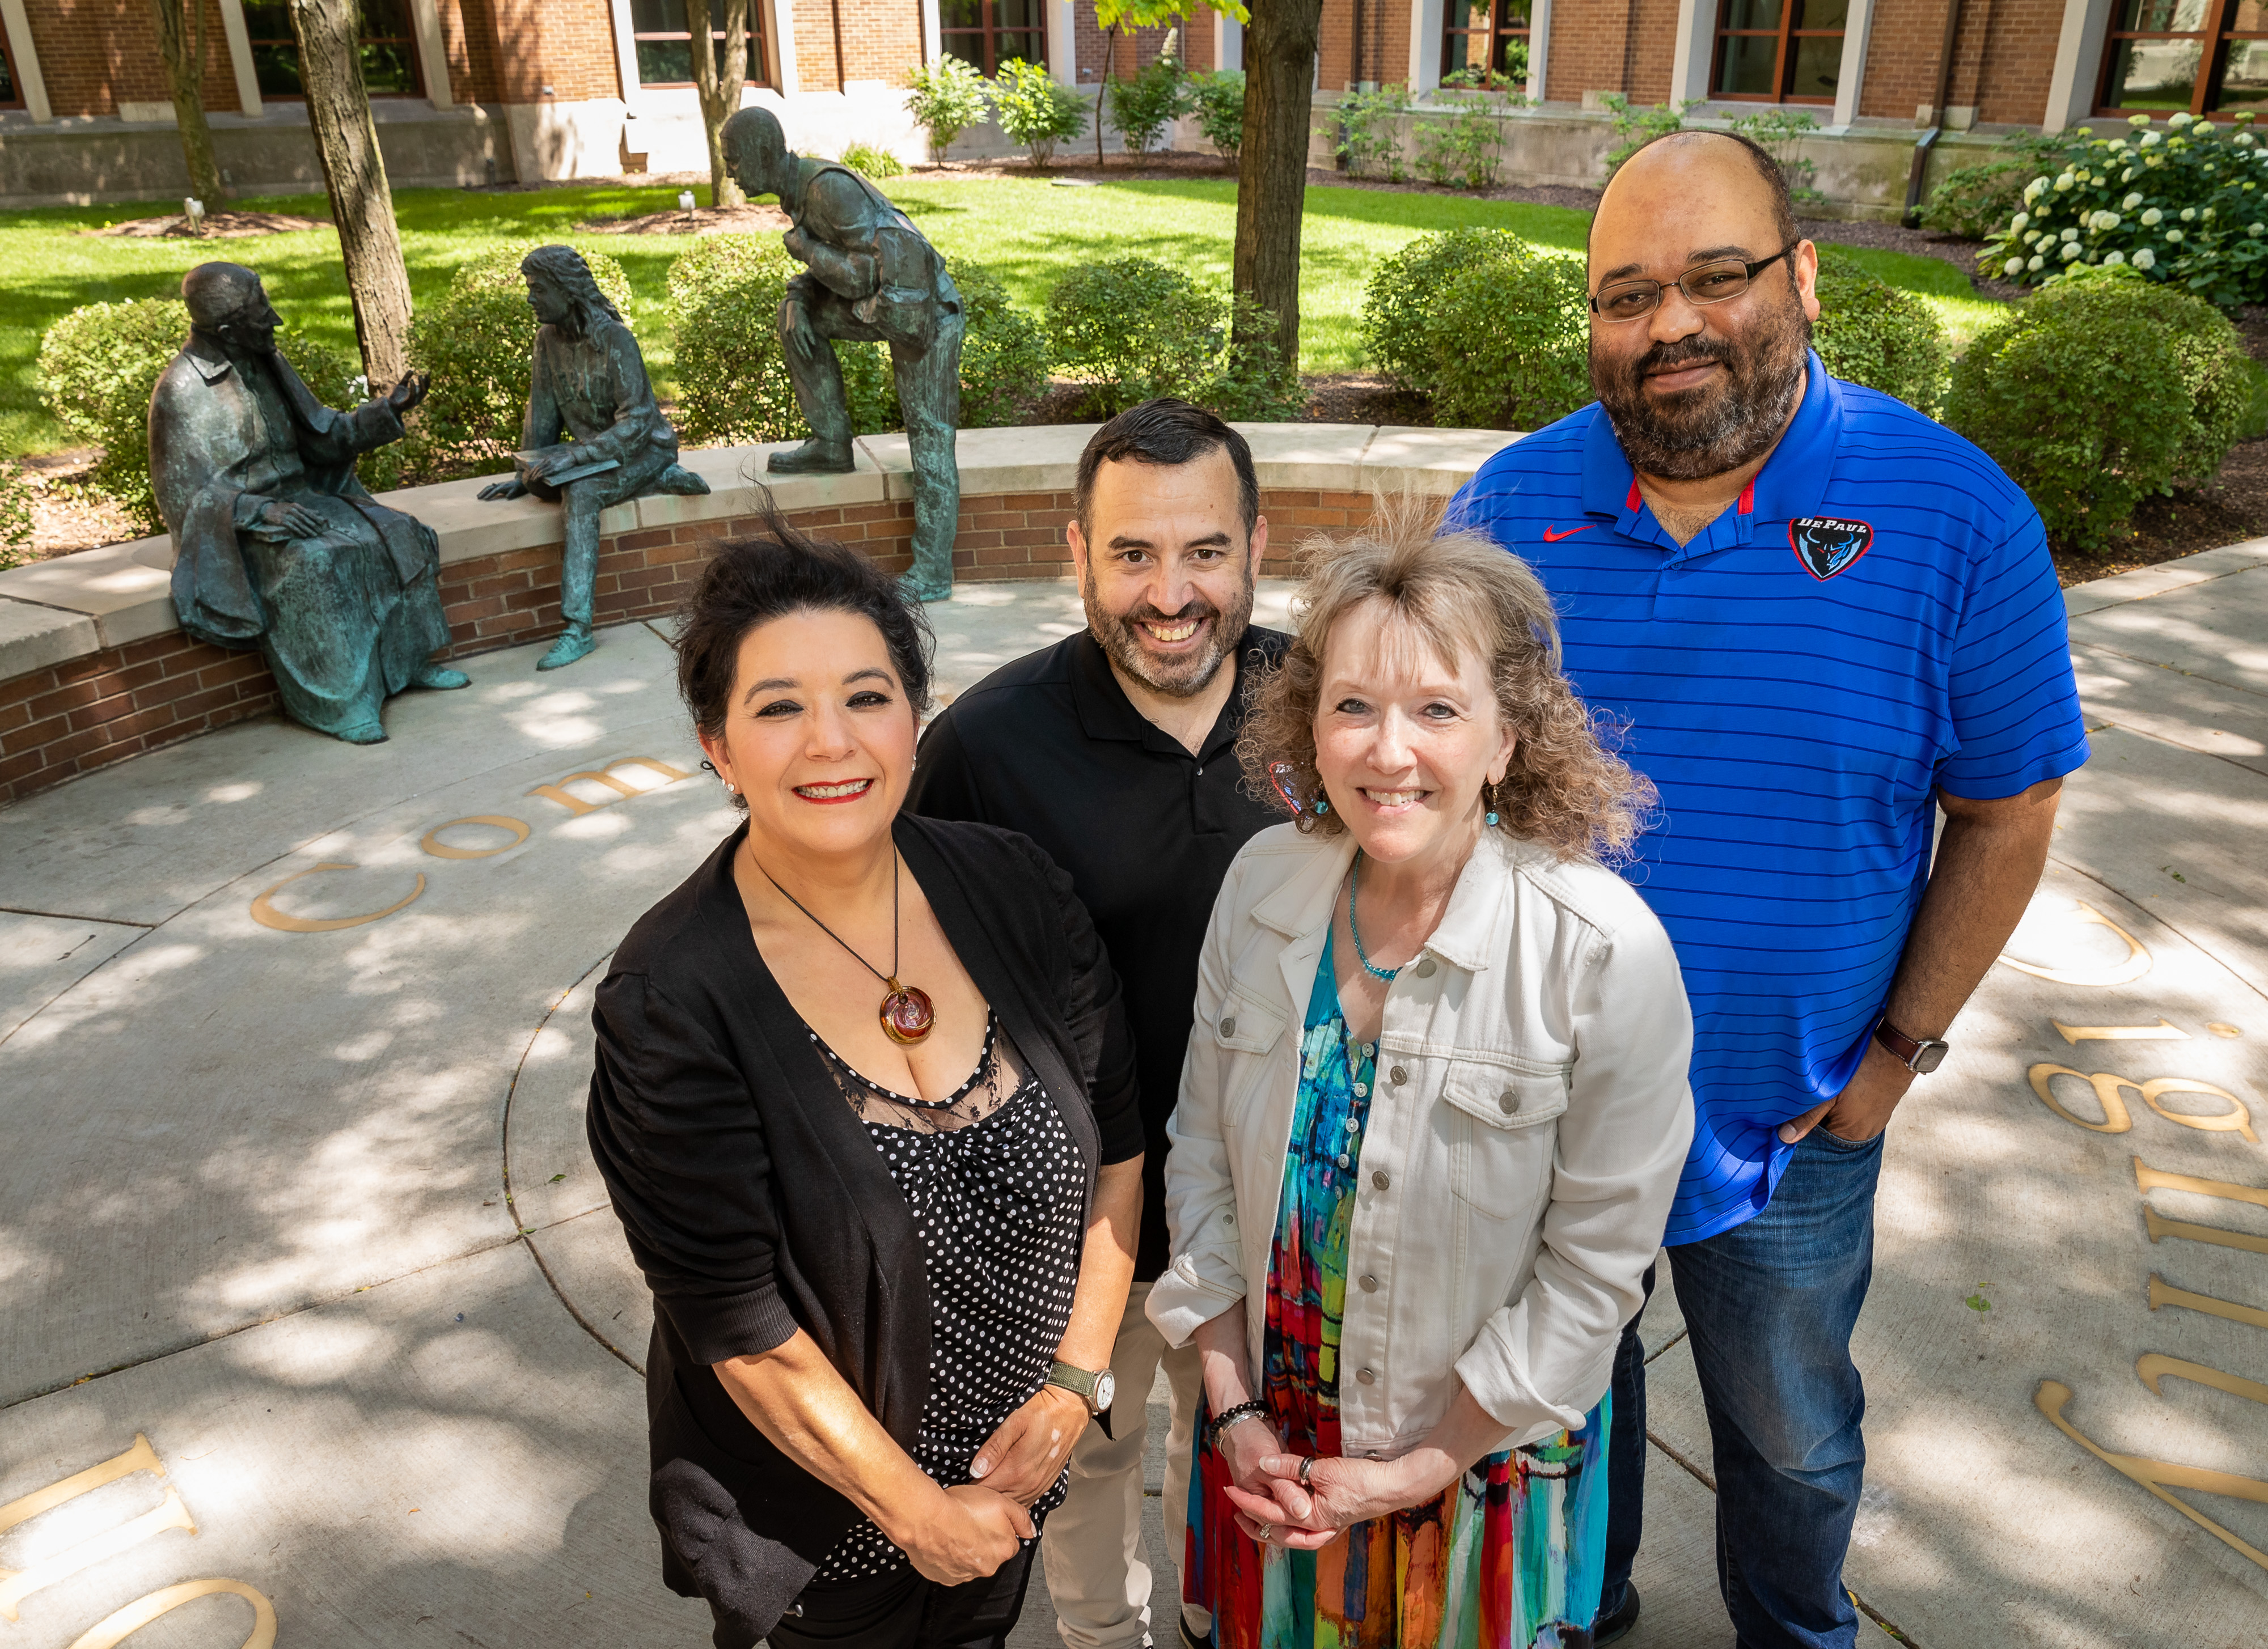 Left to right, Aurora Chavez, Rick Moreci, Nancy Grossman, and Rod Waters, recipients of the 2022-23 Spirit of DePaul Award, June 30, 2022, in Saint Vincent’s Circle. These awardees by their presence and works have made a significant contribution to DePaul University over a period of time and exemplify the mission and values of DePaul University. Not pictured, Jay Baglia and Michael Wright. (DePaul University/Jeff Carrion)